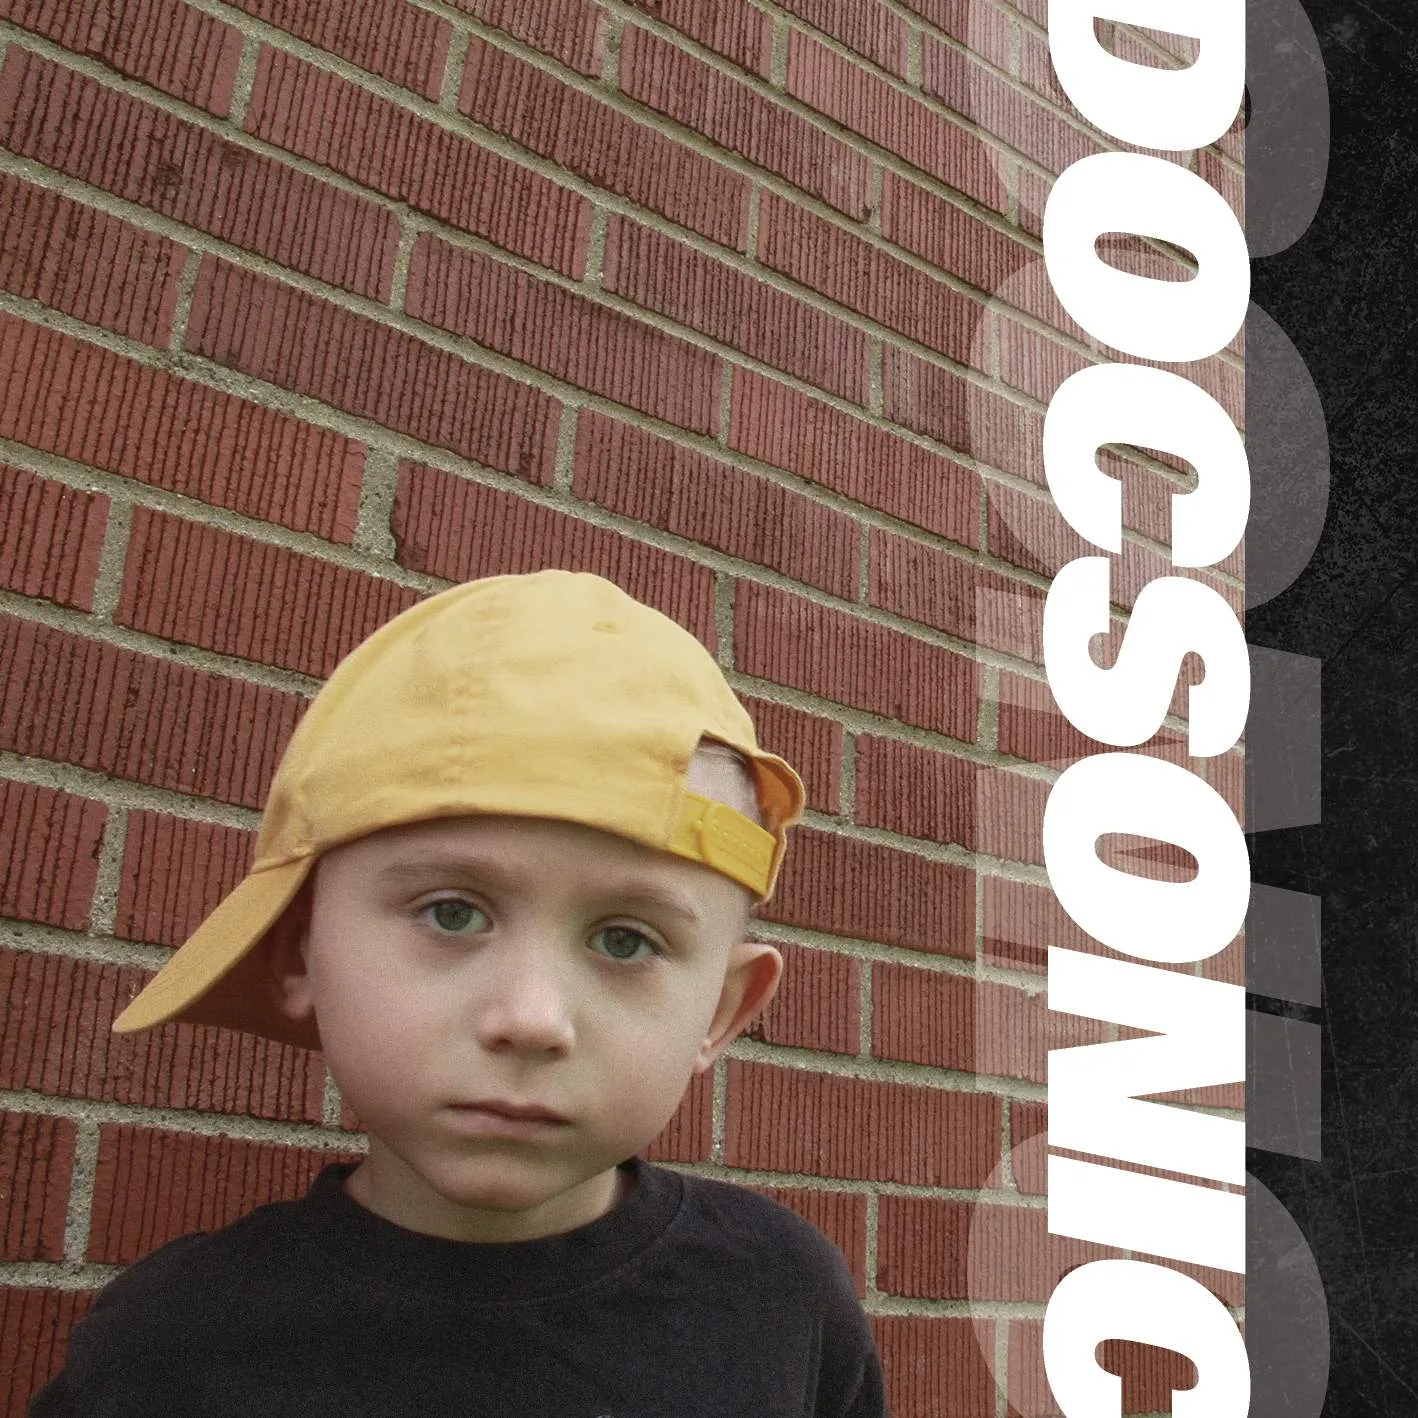 Album cover for “DocSonic” by C-Doc